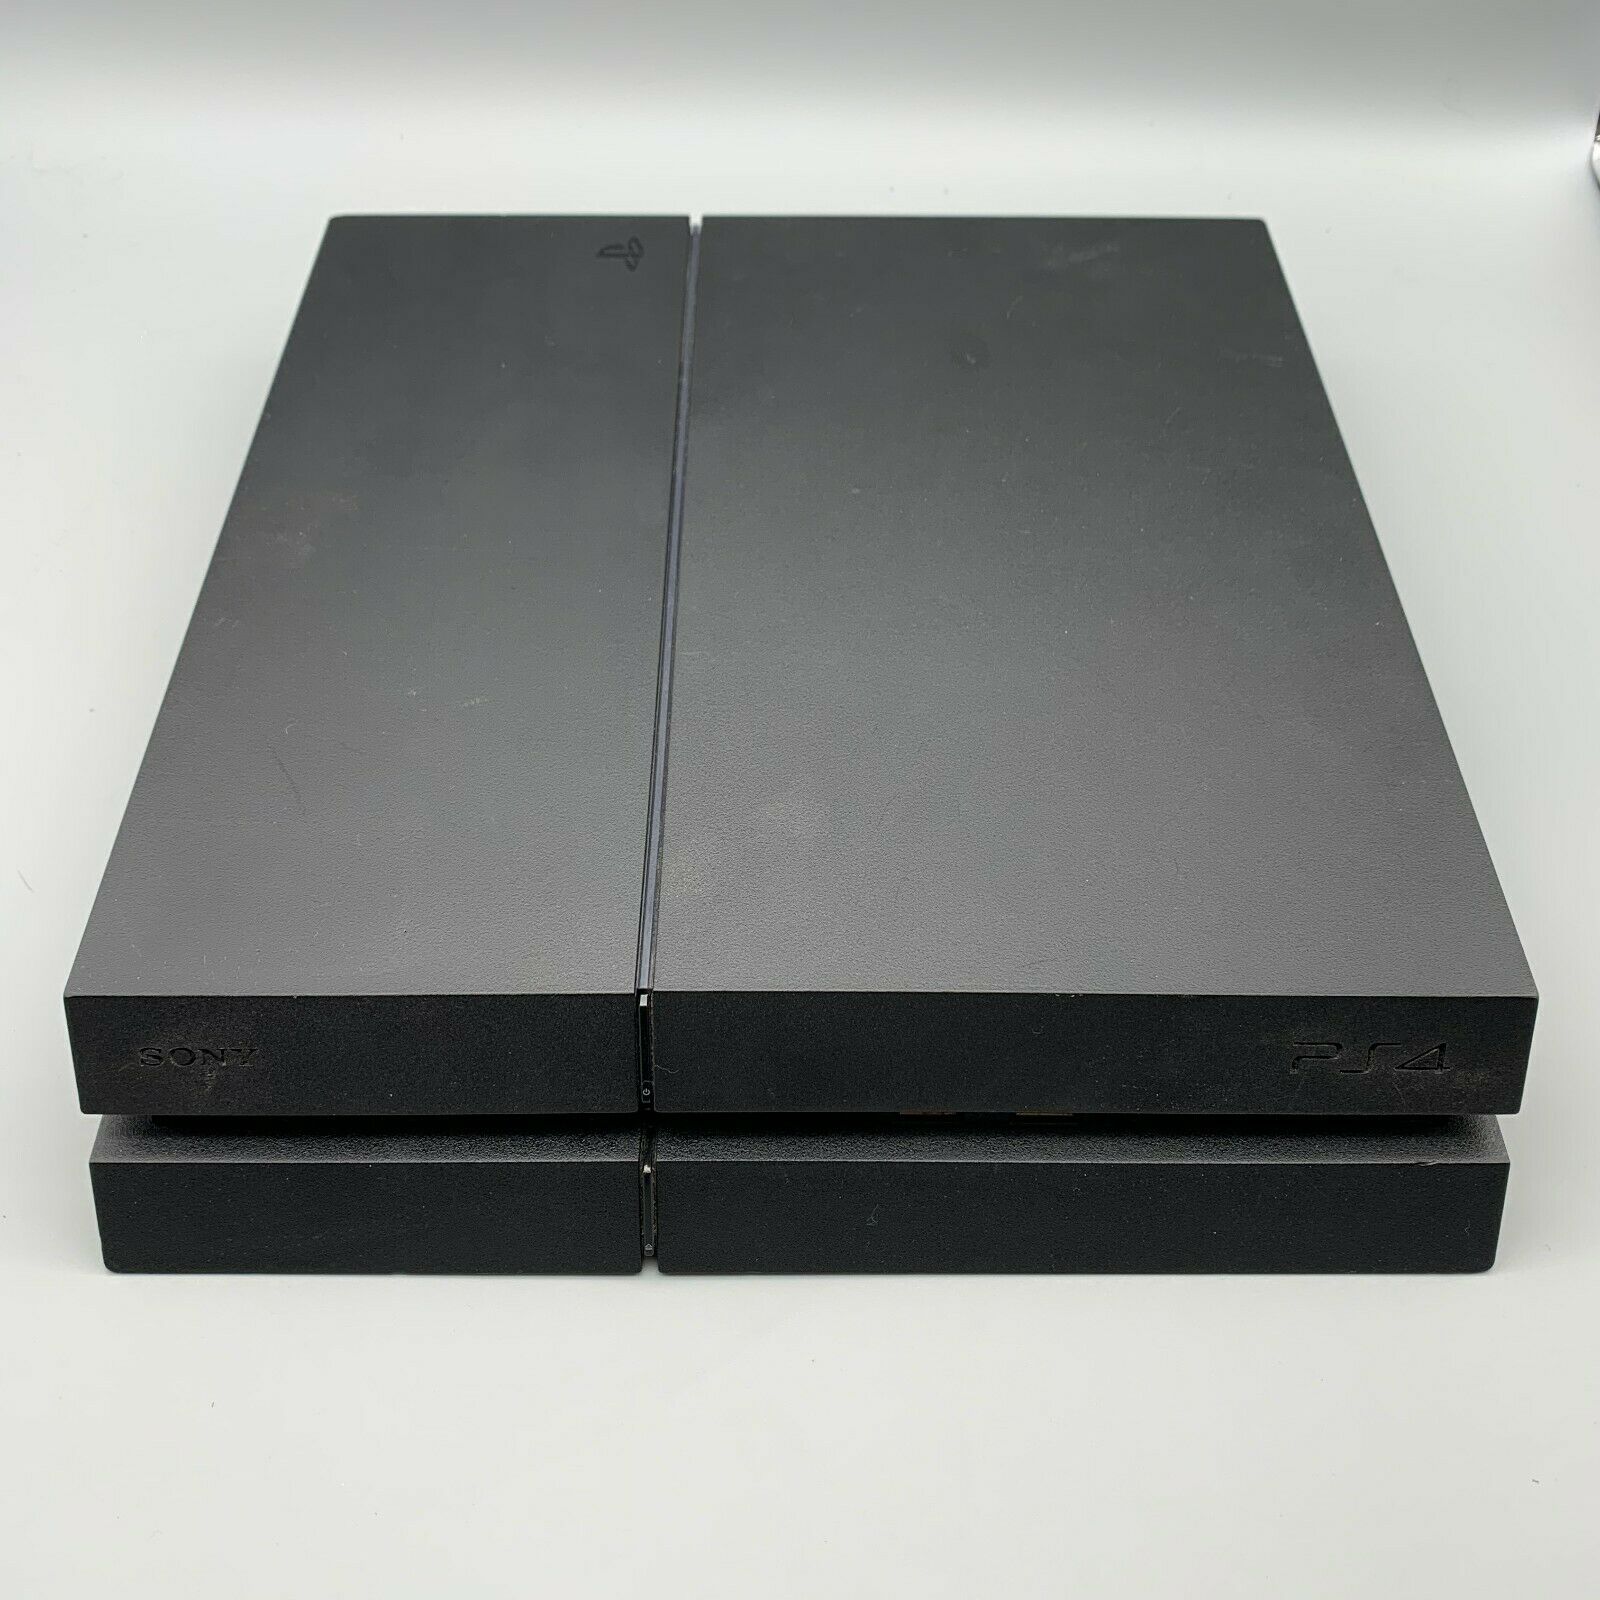 Sony CUH-1215A Ps4 500GB Console - Black - No Controller - Colossal